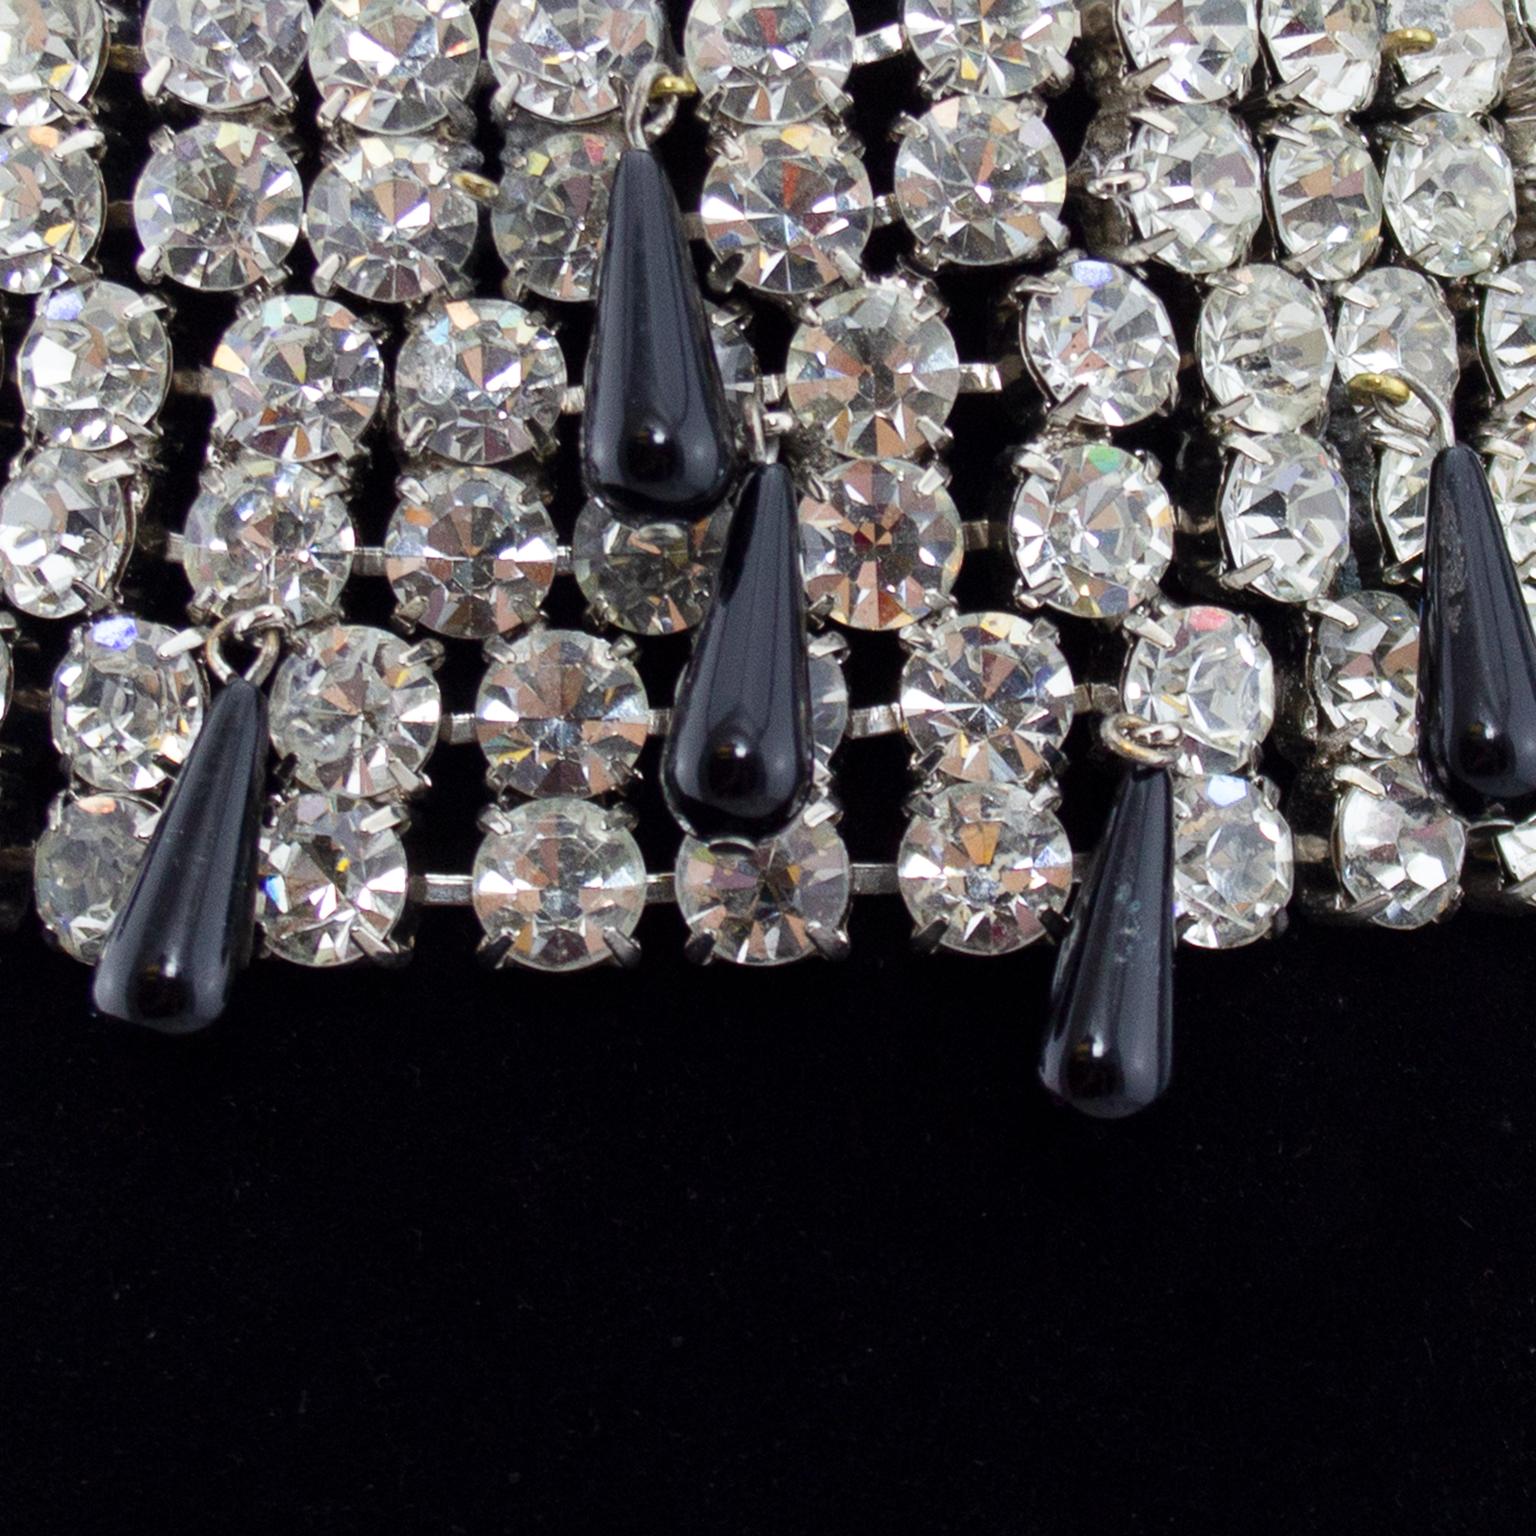 1980s Galanos Rhinestone Choker with Black Teardrop Beads In Good Condition For Sale In Toronto, Ontario